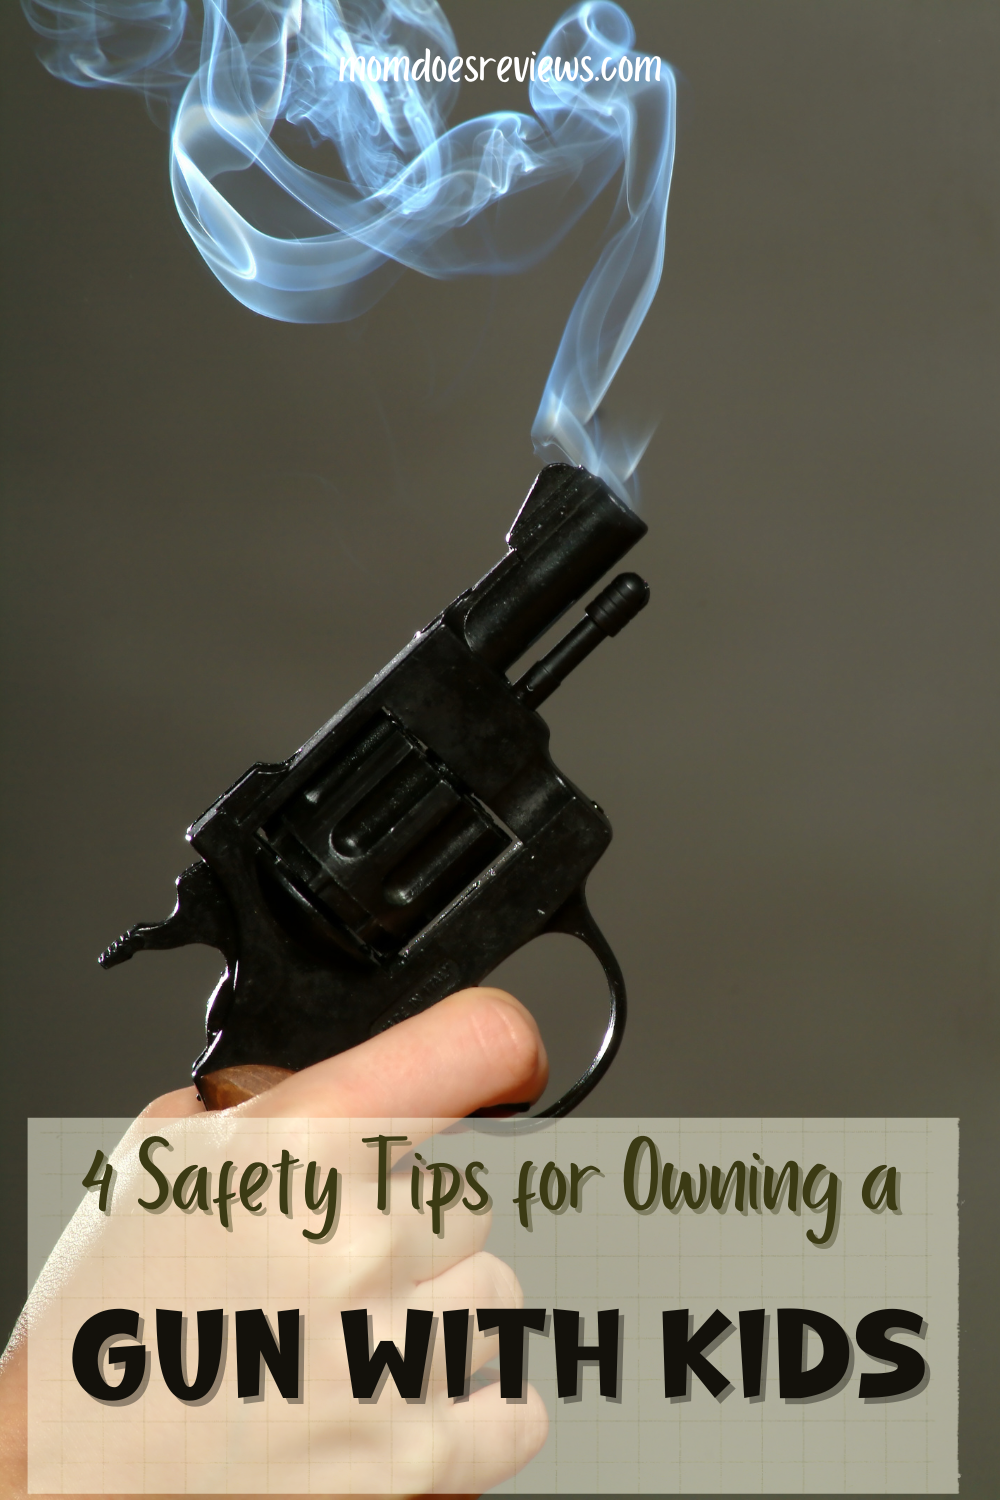 4 Safety Tips for Owning a Gun with Children